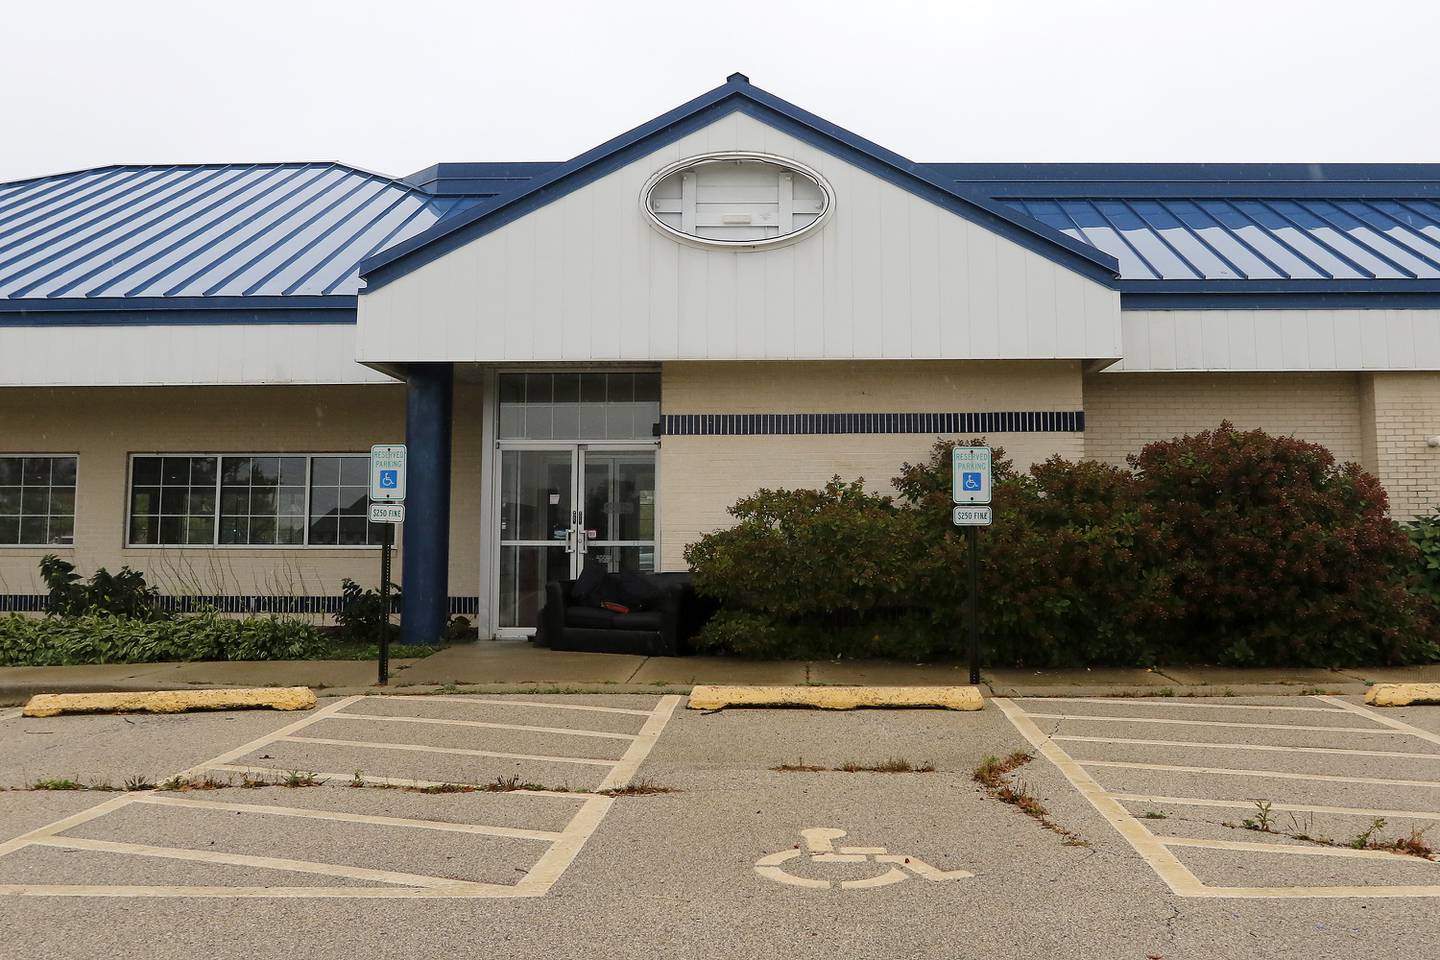 The former Culver's location at 501 Pingree Road is seen on Thursday, Oct. 7, 2021 in Crystal Lake.  The location has been proposed to become American Dream, which could become McHenry County's second marijuana dispensary.